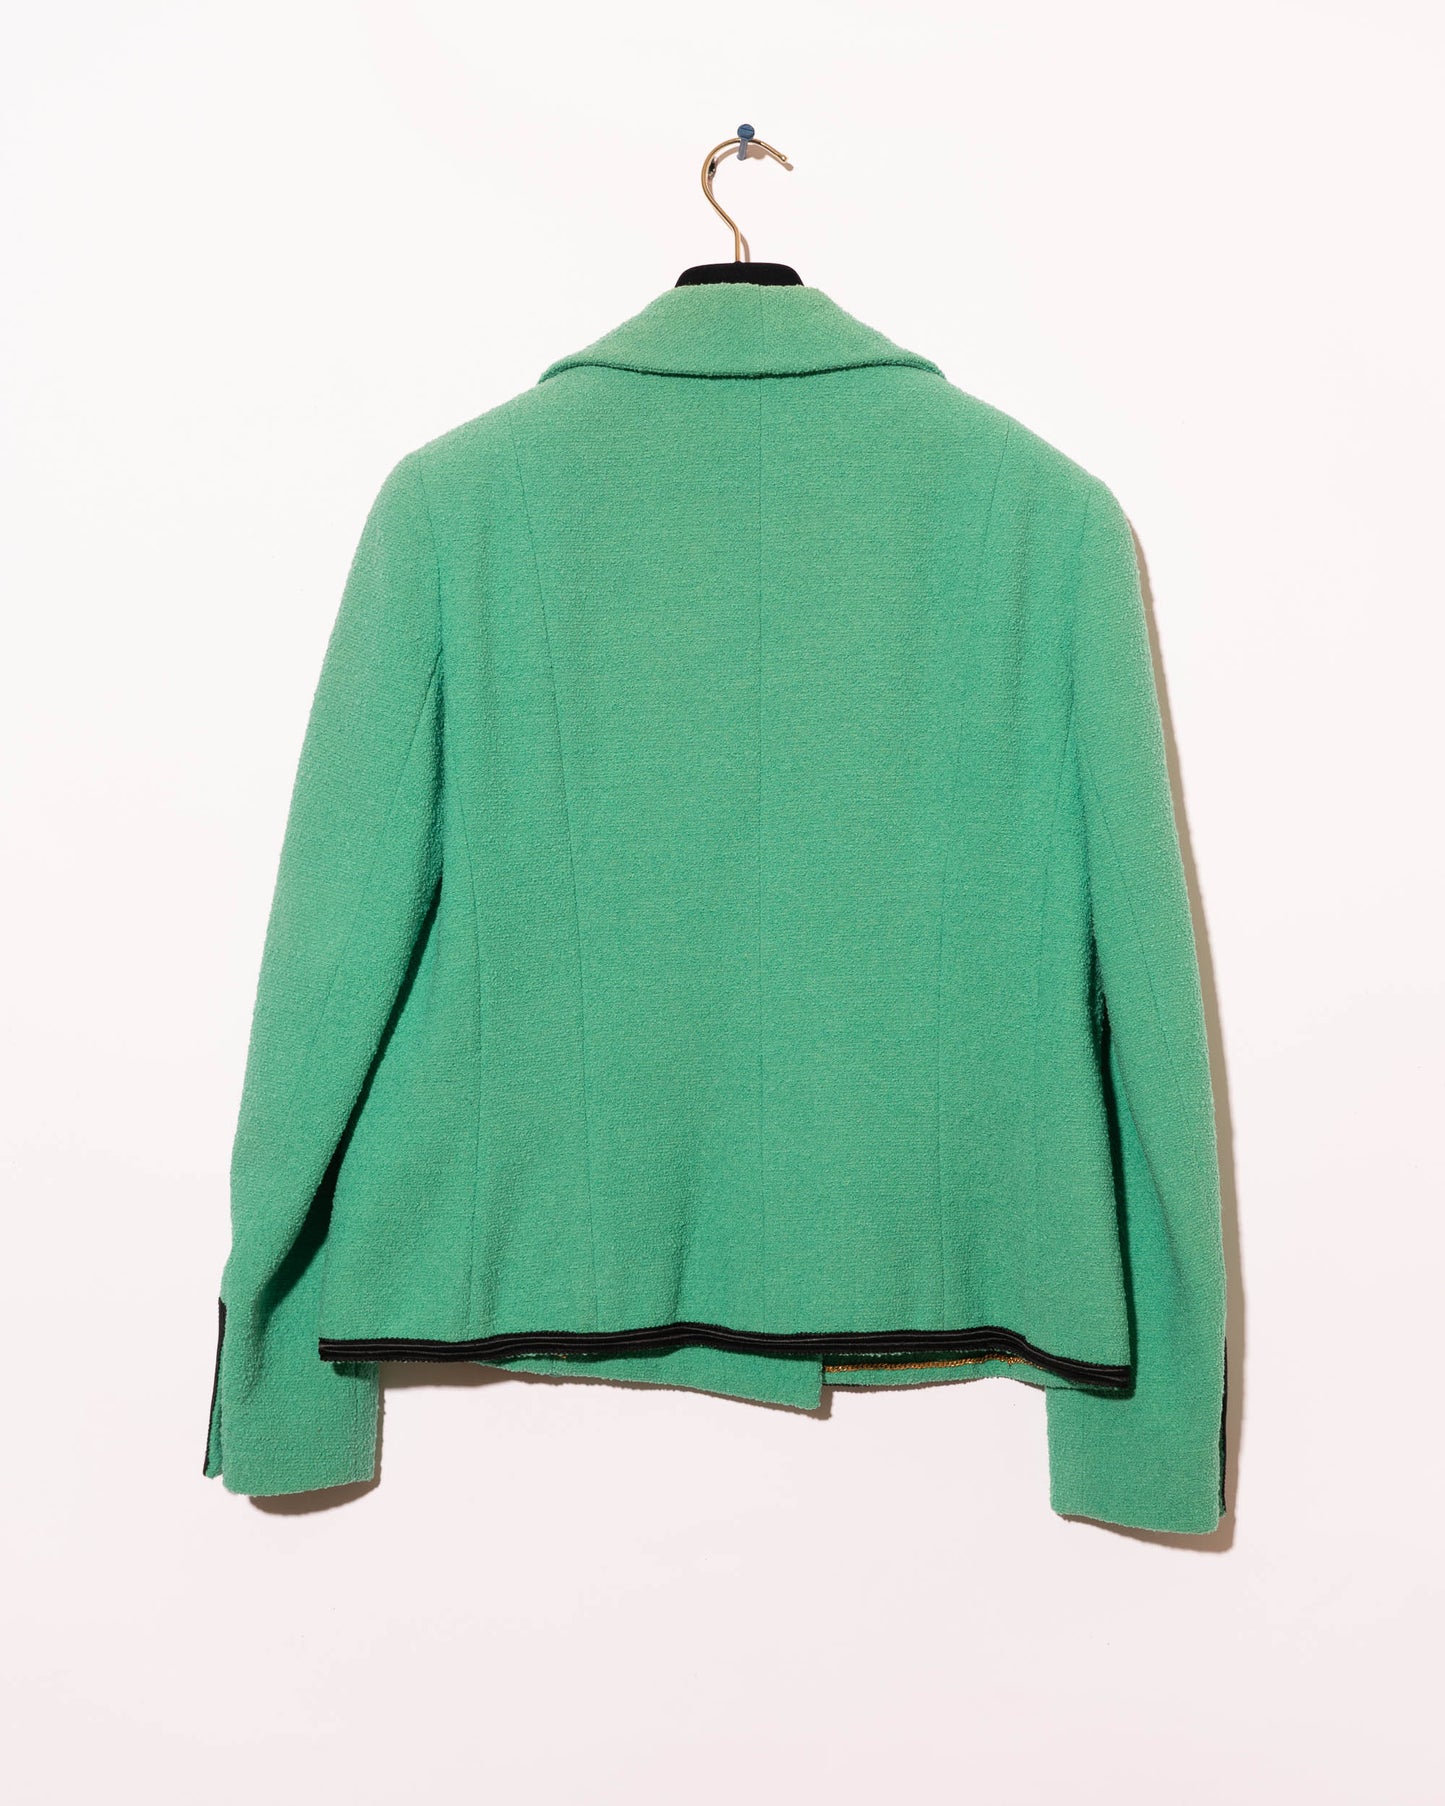 FR38-40 Rare Chanel Cruise 1990 Double-Breasted Green Tweed Boucle Jacket